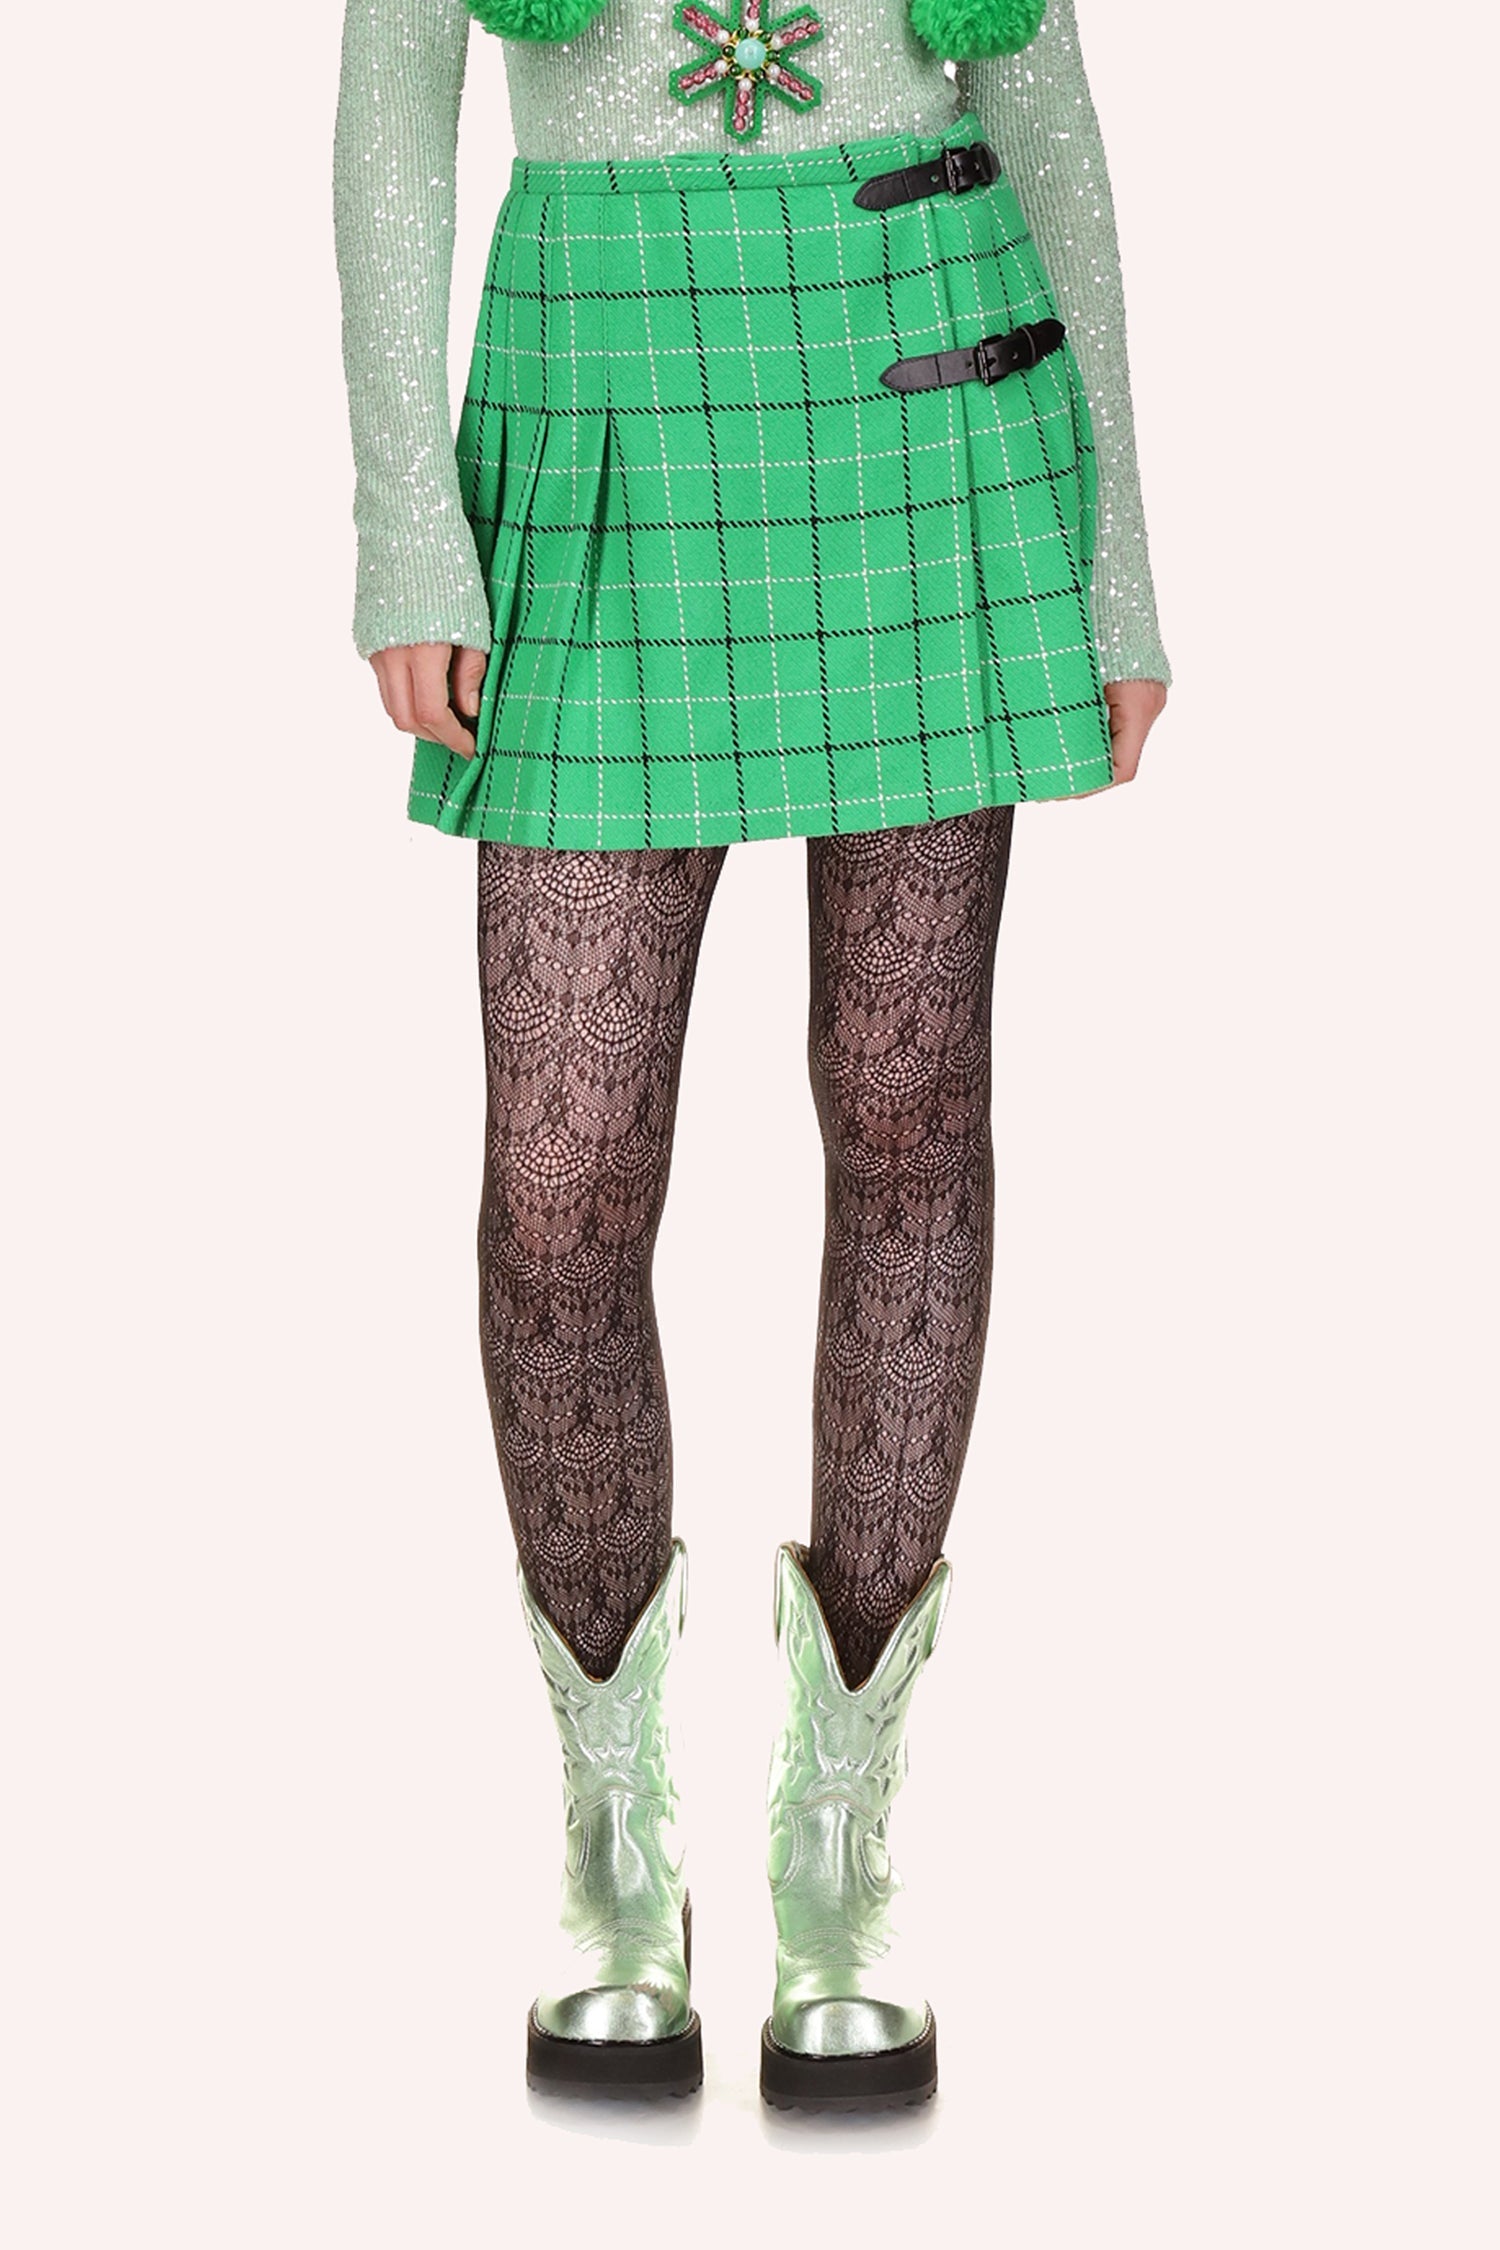 Pleated Skirt Clover, mini skirt, with pattern of dark green and white borders in square shape, 2 black buckles on left